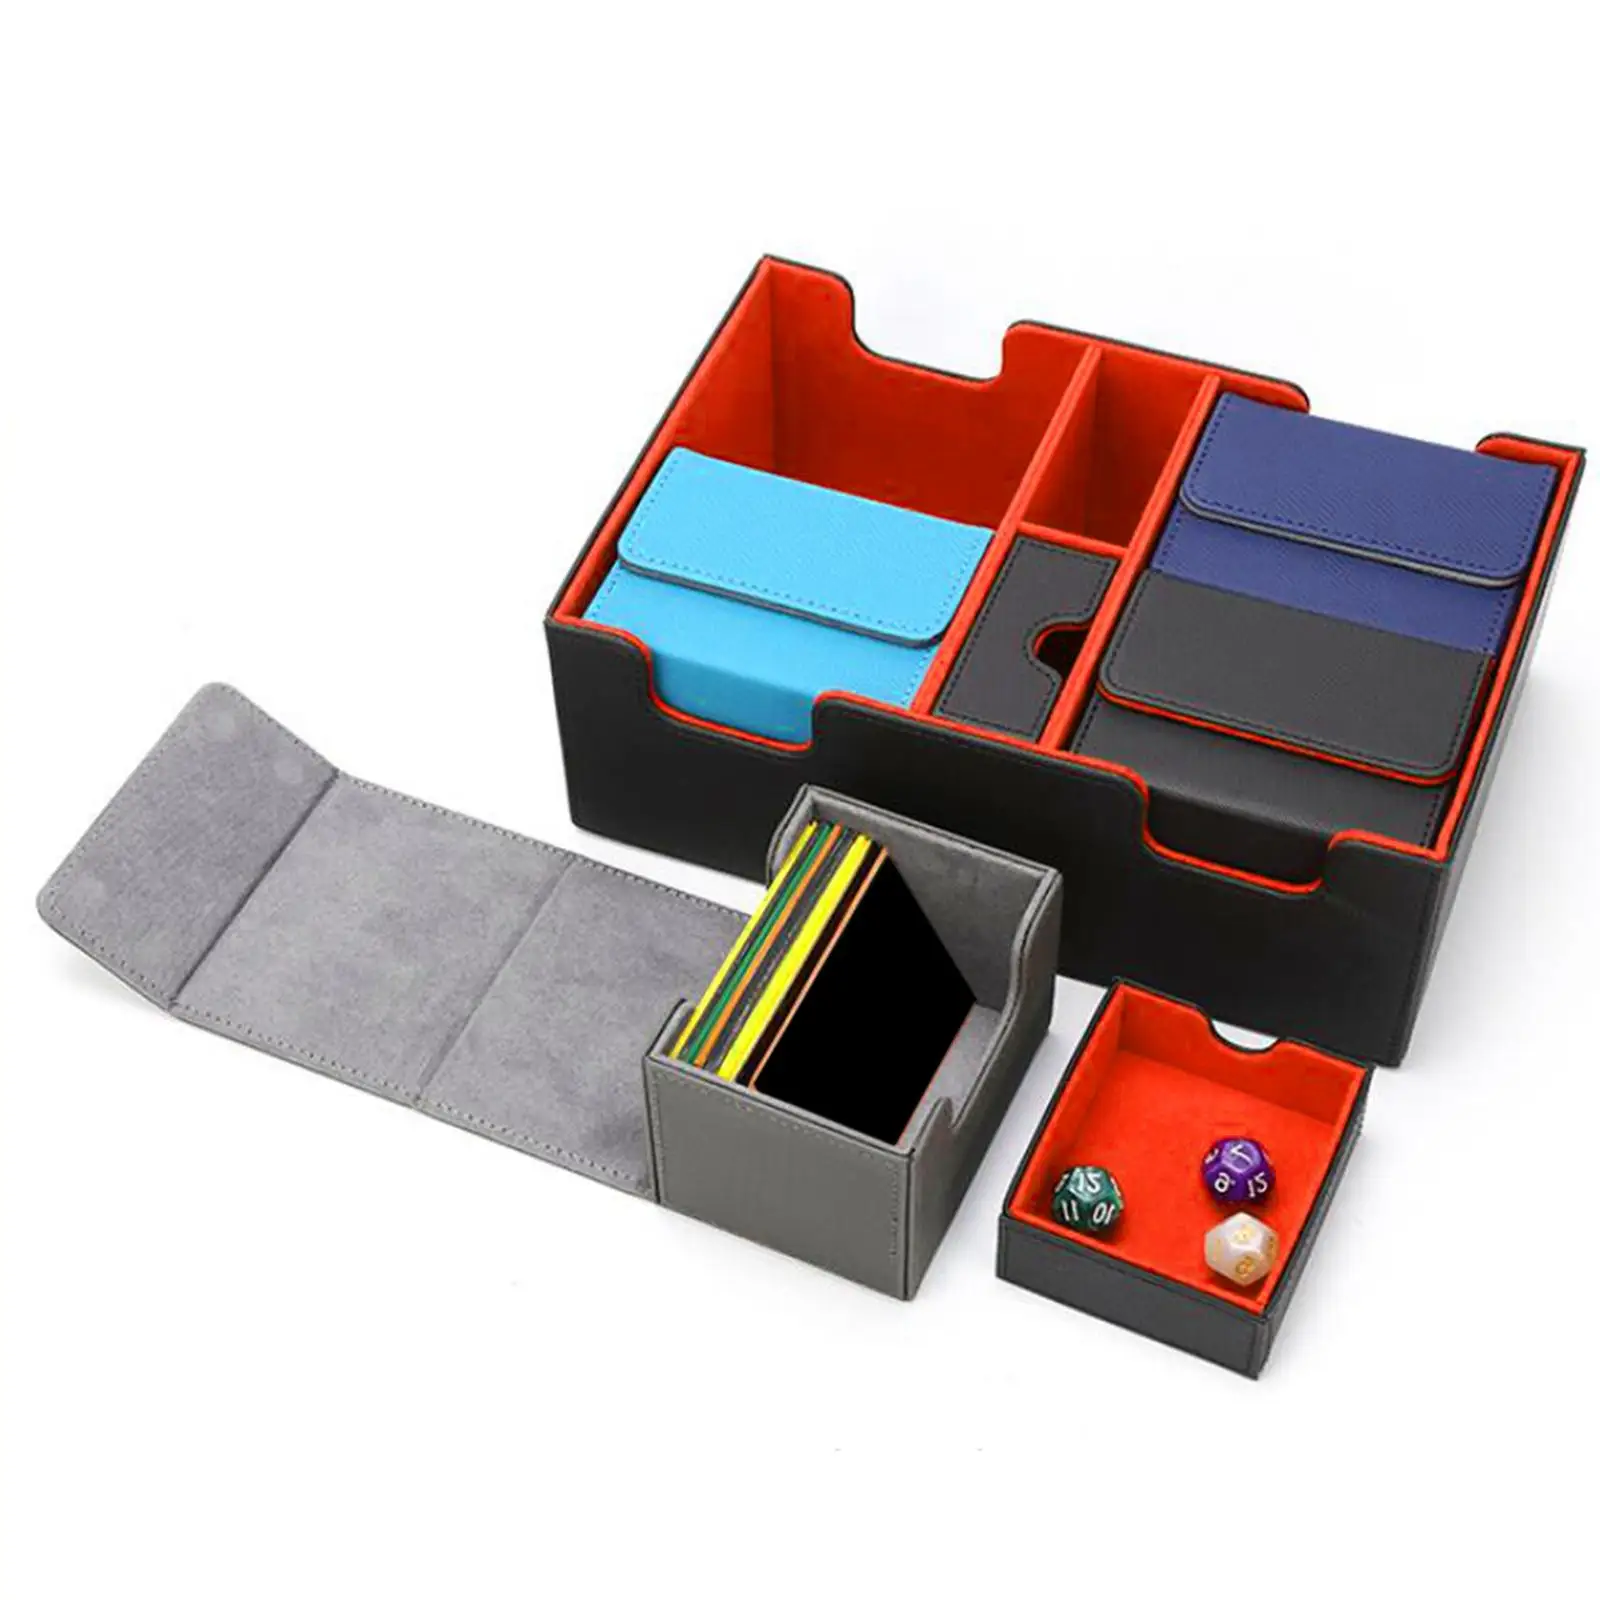 Premium Trading Card Deck Box Multi Functional Container Case for Trading Card Games